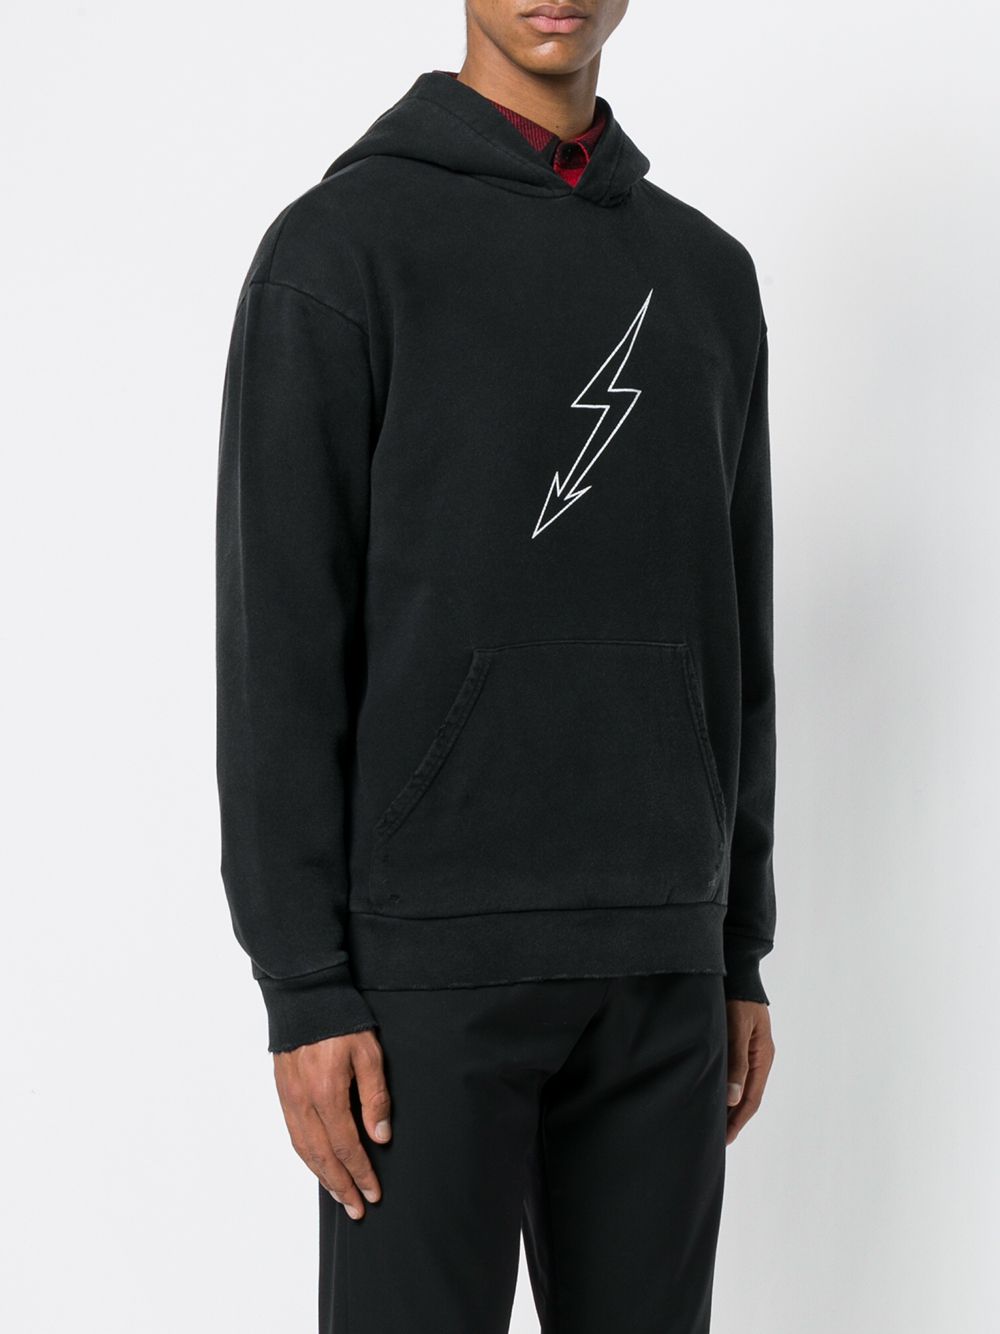 Givenchy lightning bolt world tour hoodie $652 - Buy AW18 Online - Fast  Global Delivery, Price